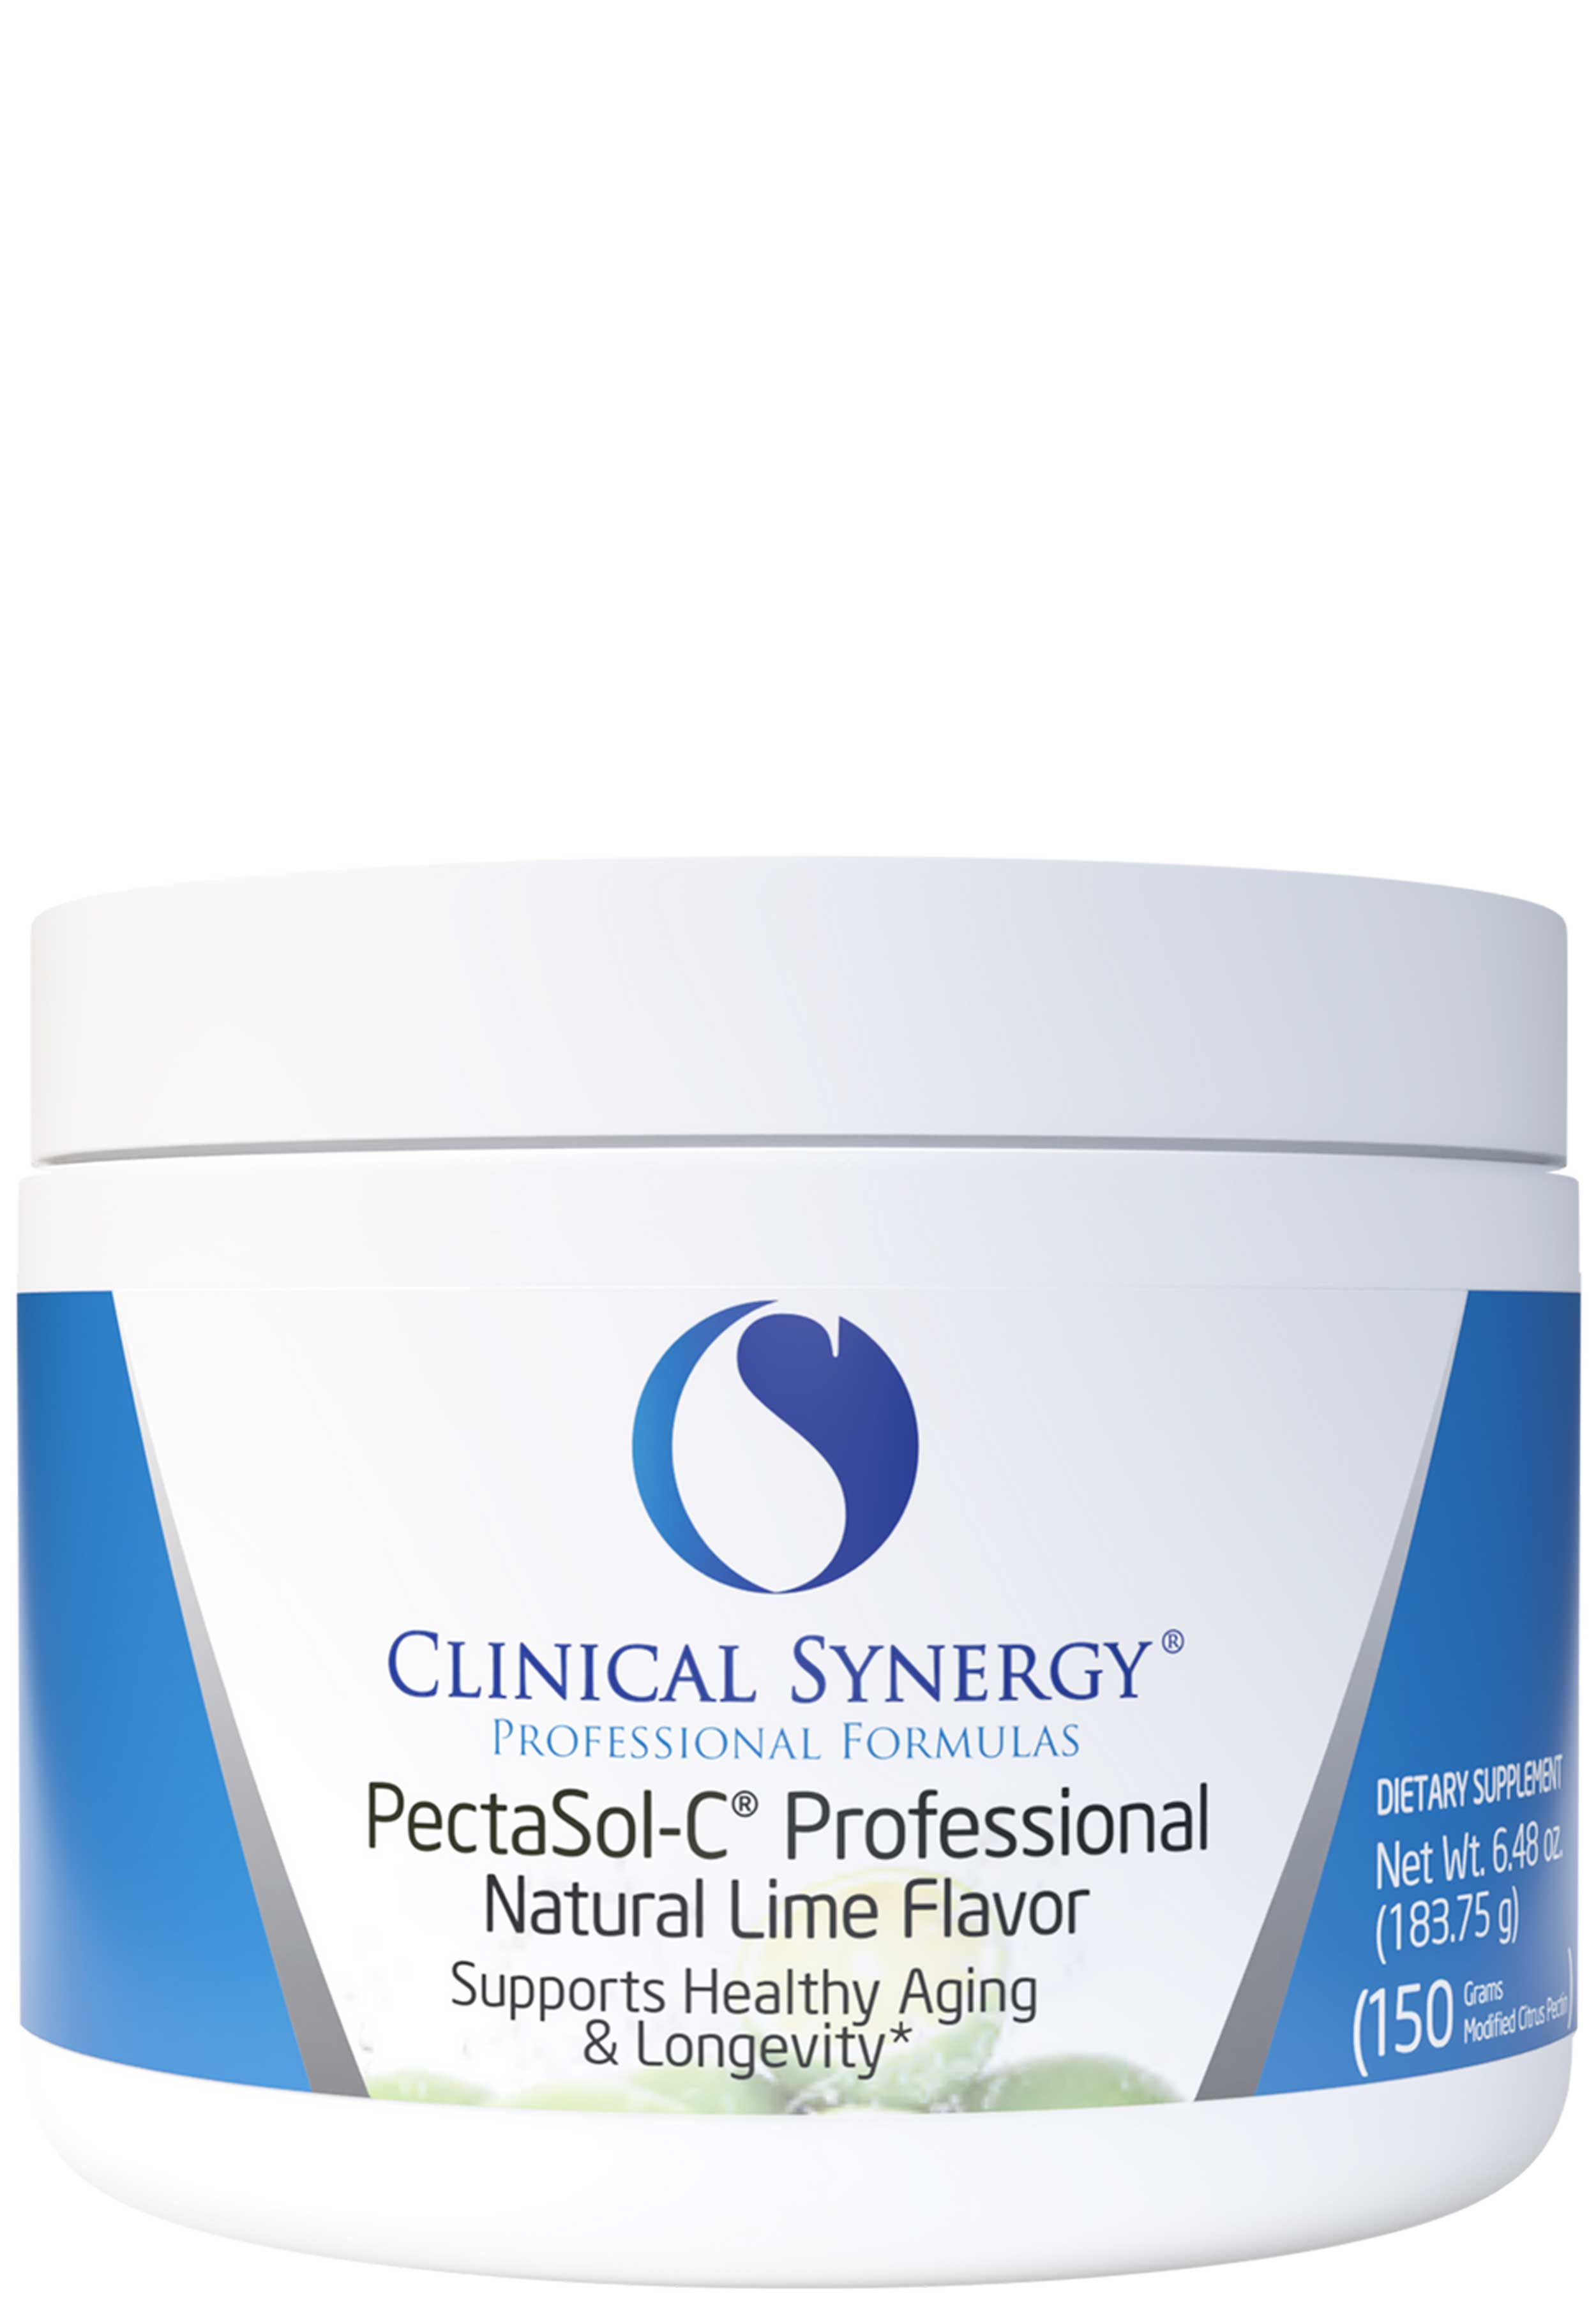 Clinical Synergy Professional Formulas PectaSol-C Professional Lime